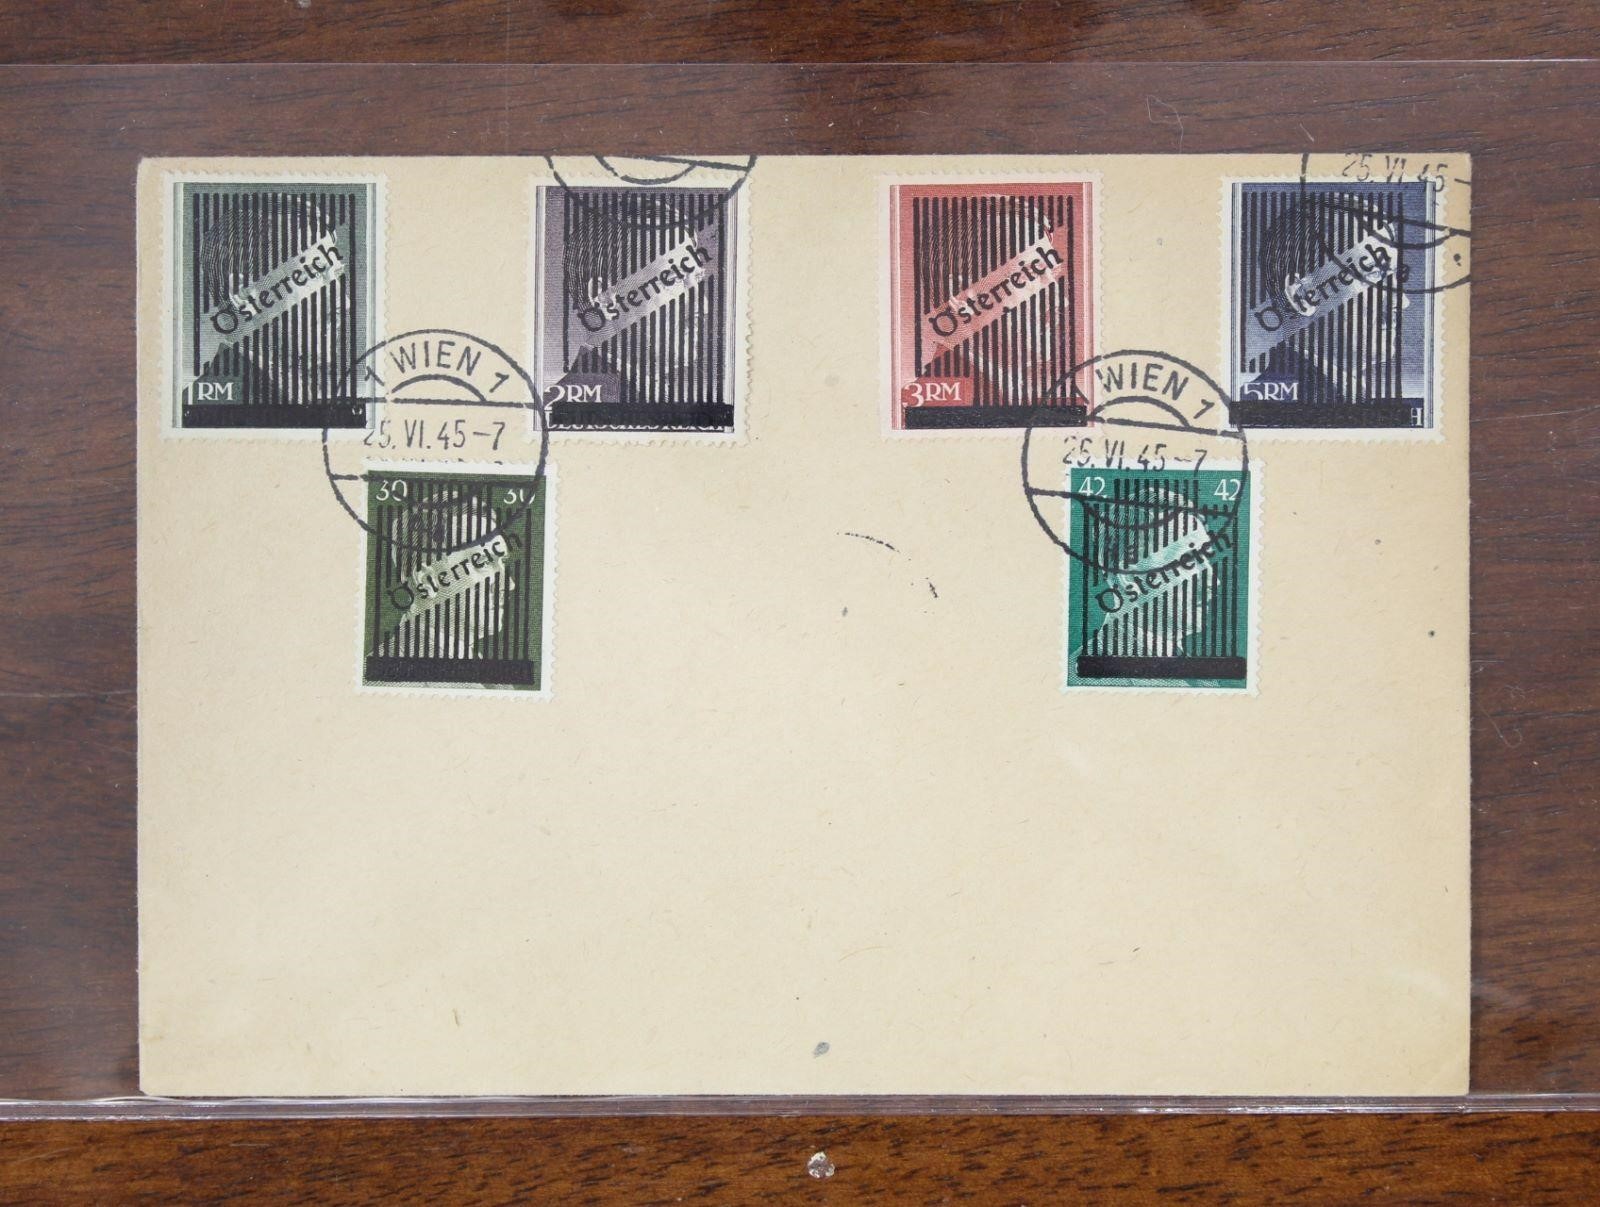 March 7th, 2021 Weekly Stamps & Collectibles Auction